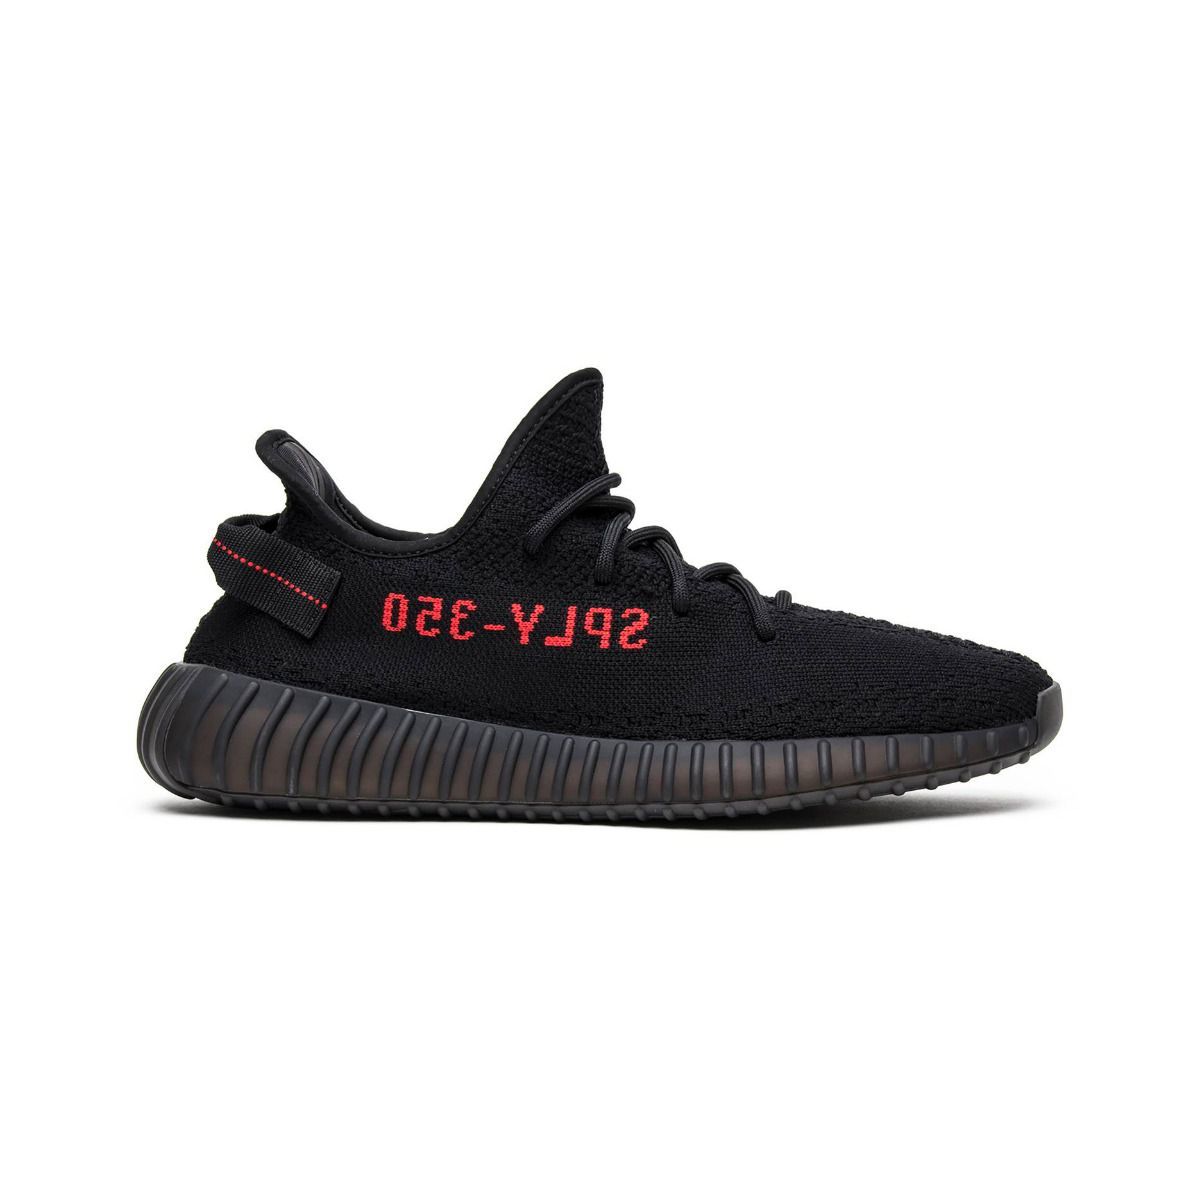 Cheap Men’S Shoes Adidas Yeezy Boost 350 V2 Beluga Reflective Us13（Gw1229）
Cheap Adidas Yeezy Boost 350 V2 Zebra Cp9654 Size 11 Order Confirmed